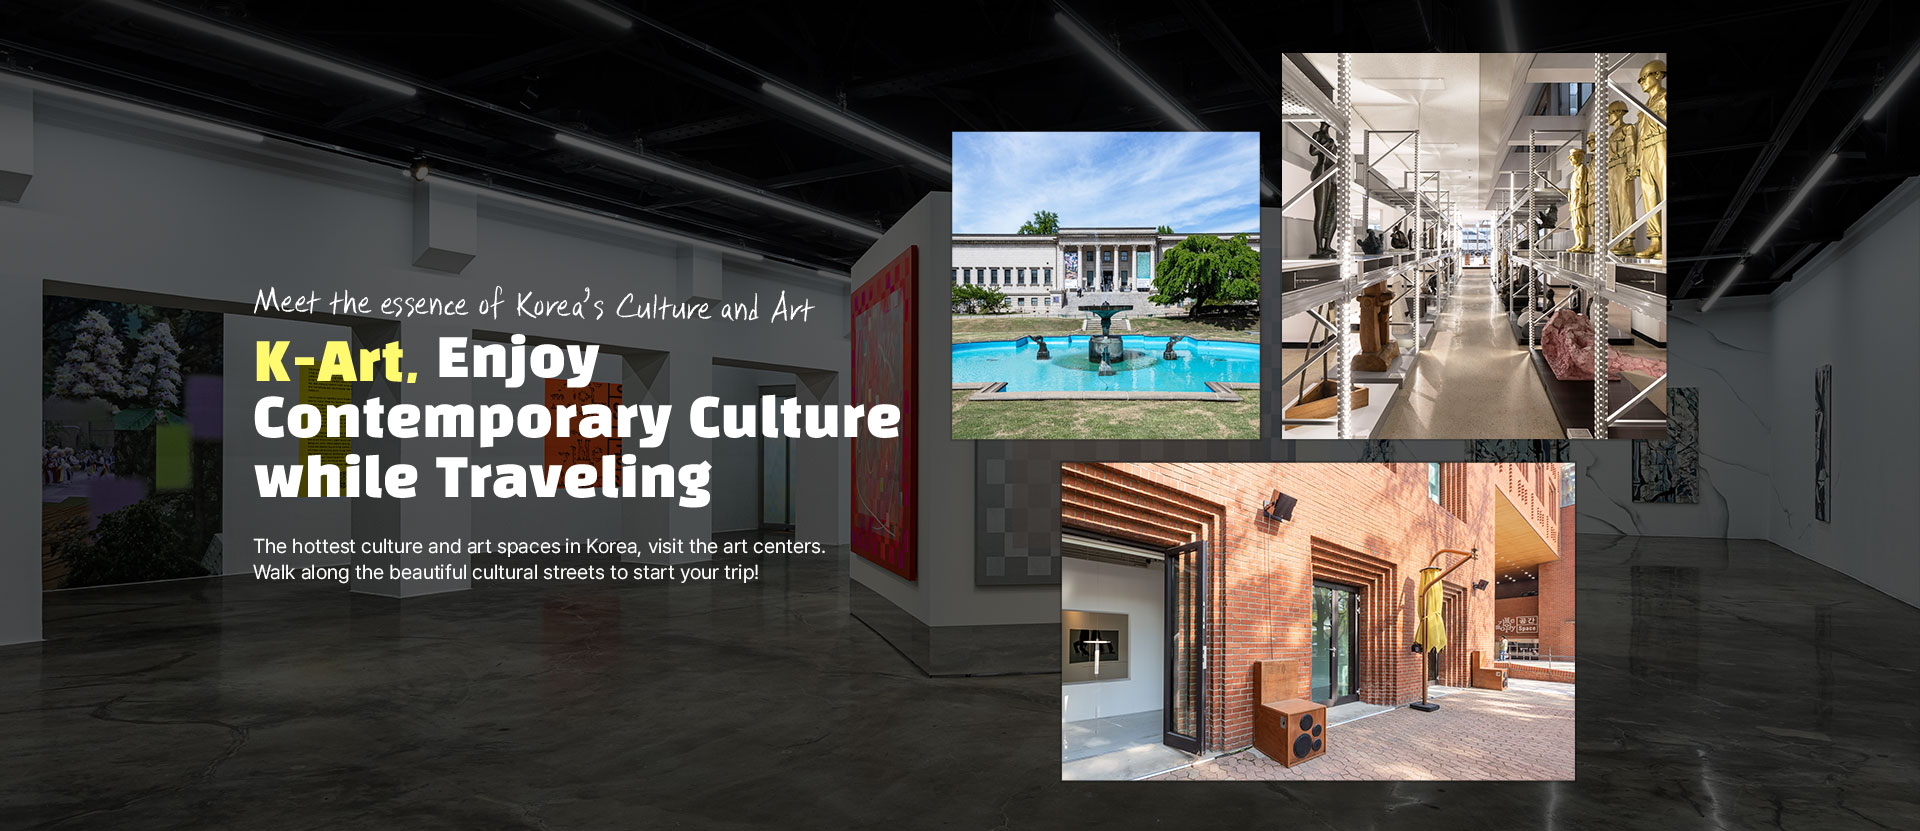 Meet the essence of Korea’s Culture and Art K-Art, Enjoy Contemporary Culture while Traveling The hottest culture and art spaces in Korea, visit the art centers. Walk along the beautiful cultural streets to start your trip!